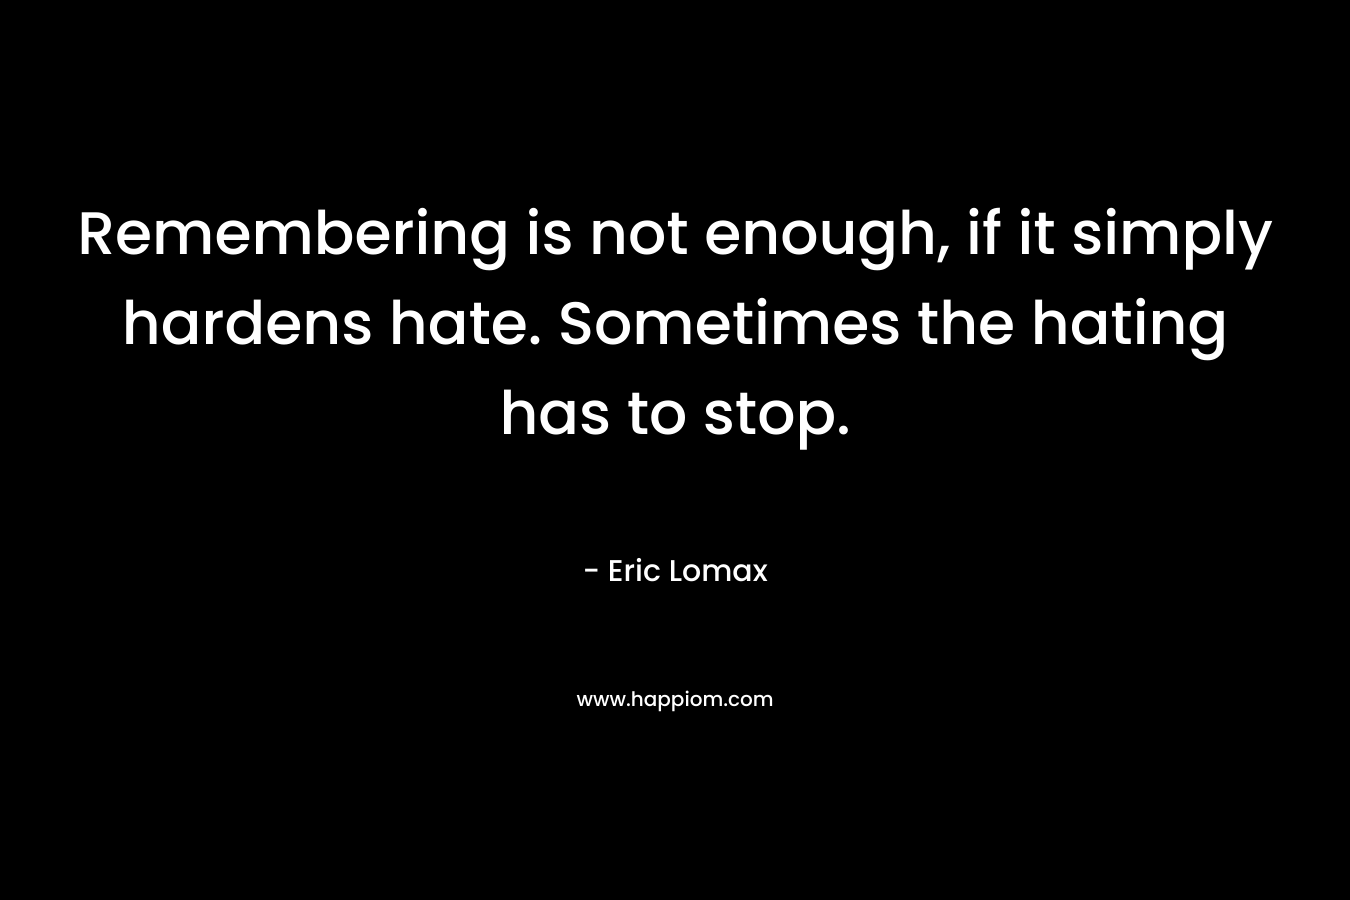 Remembering is not enough, if it simply hardens hate. Sometimes the hating has to stop. – Eric Lomax